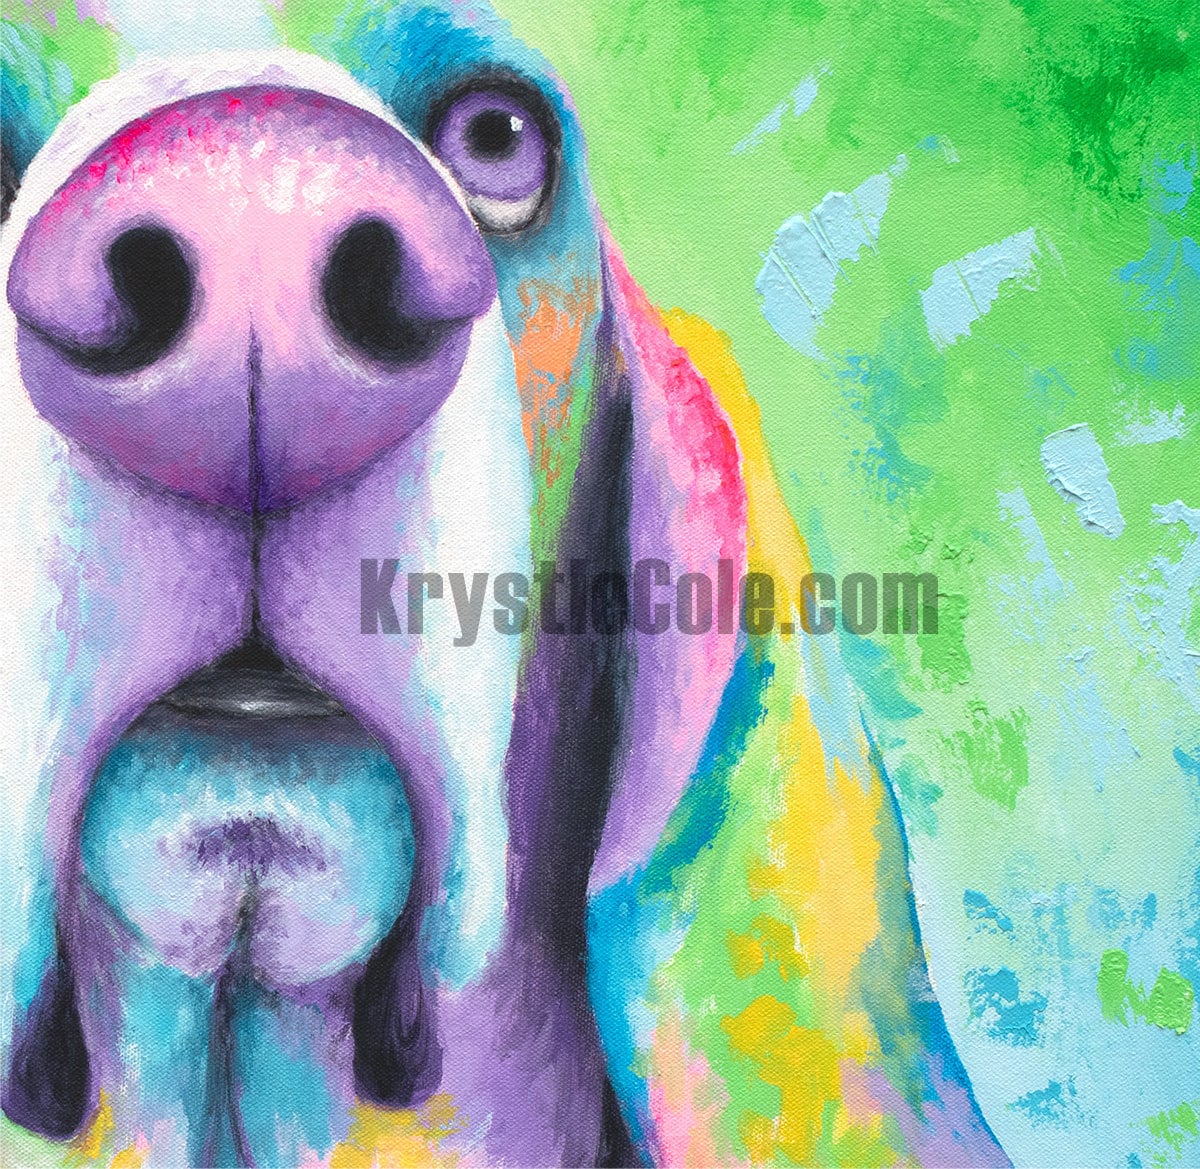 Basset Hound Art Print on CANVAS or PAPER - Basset Hound Painting by Krystle Cole